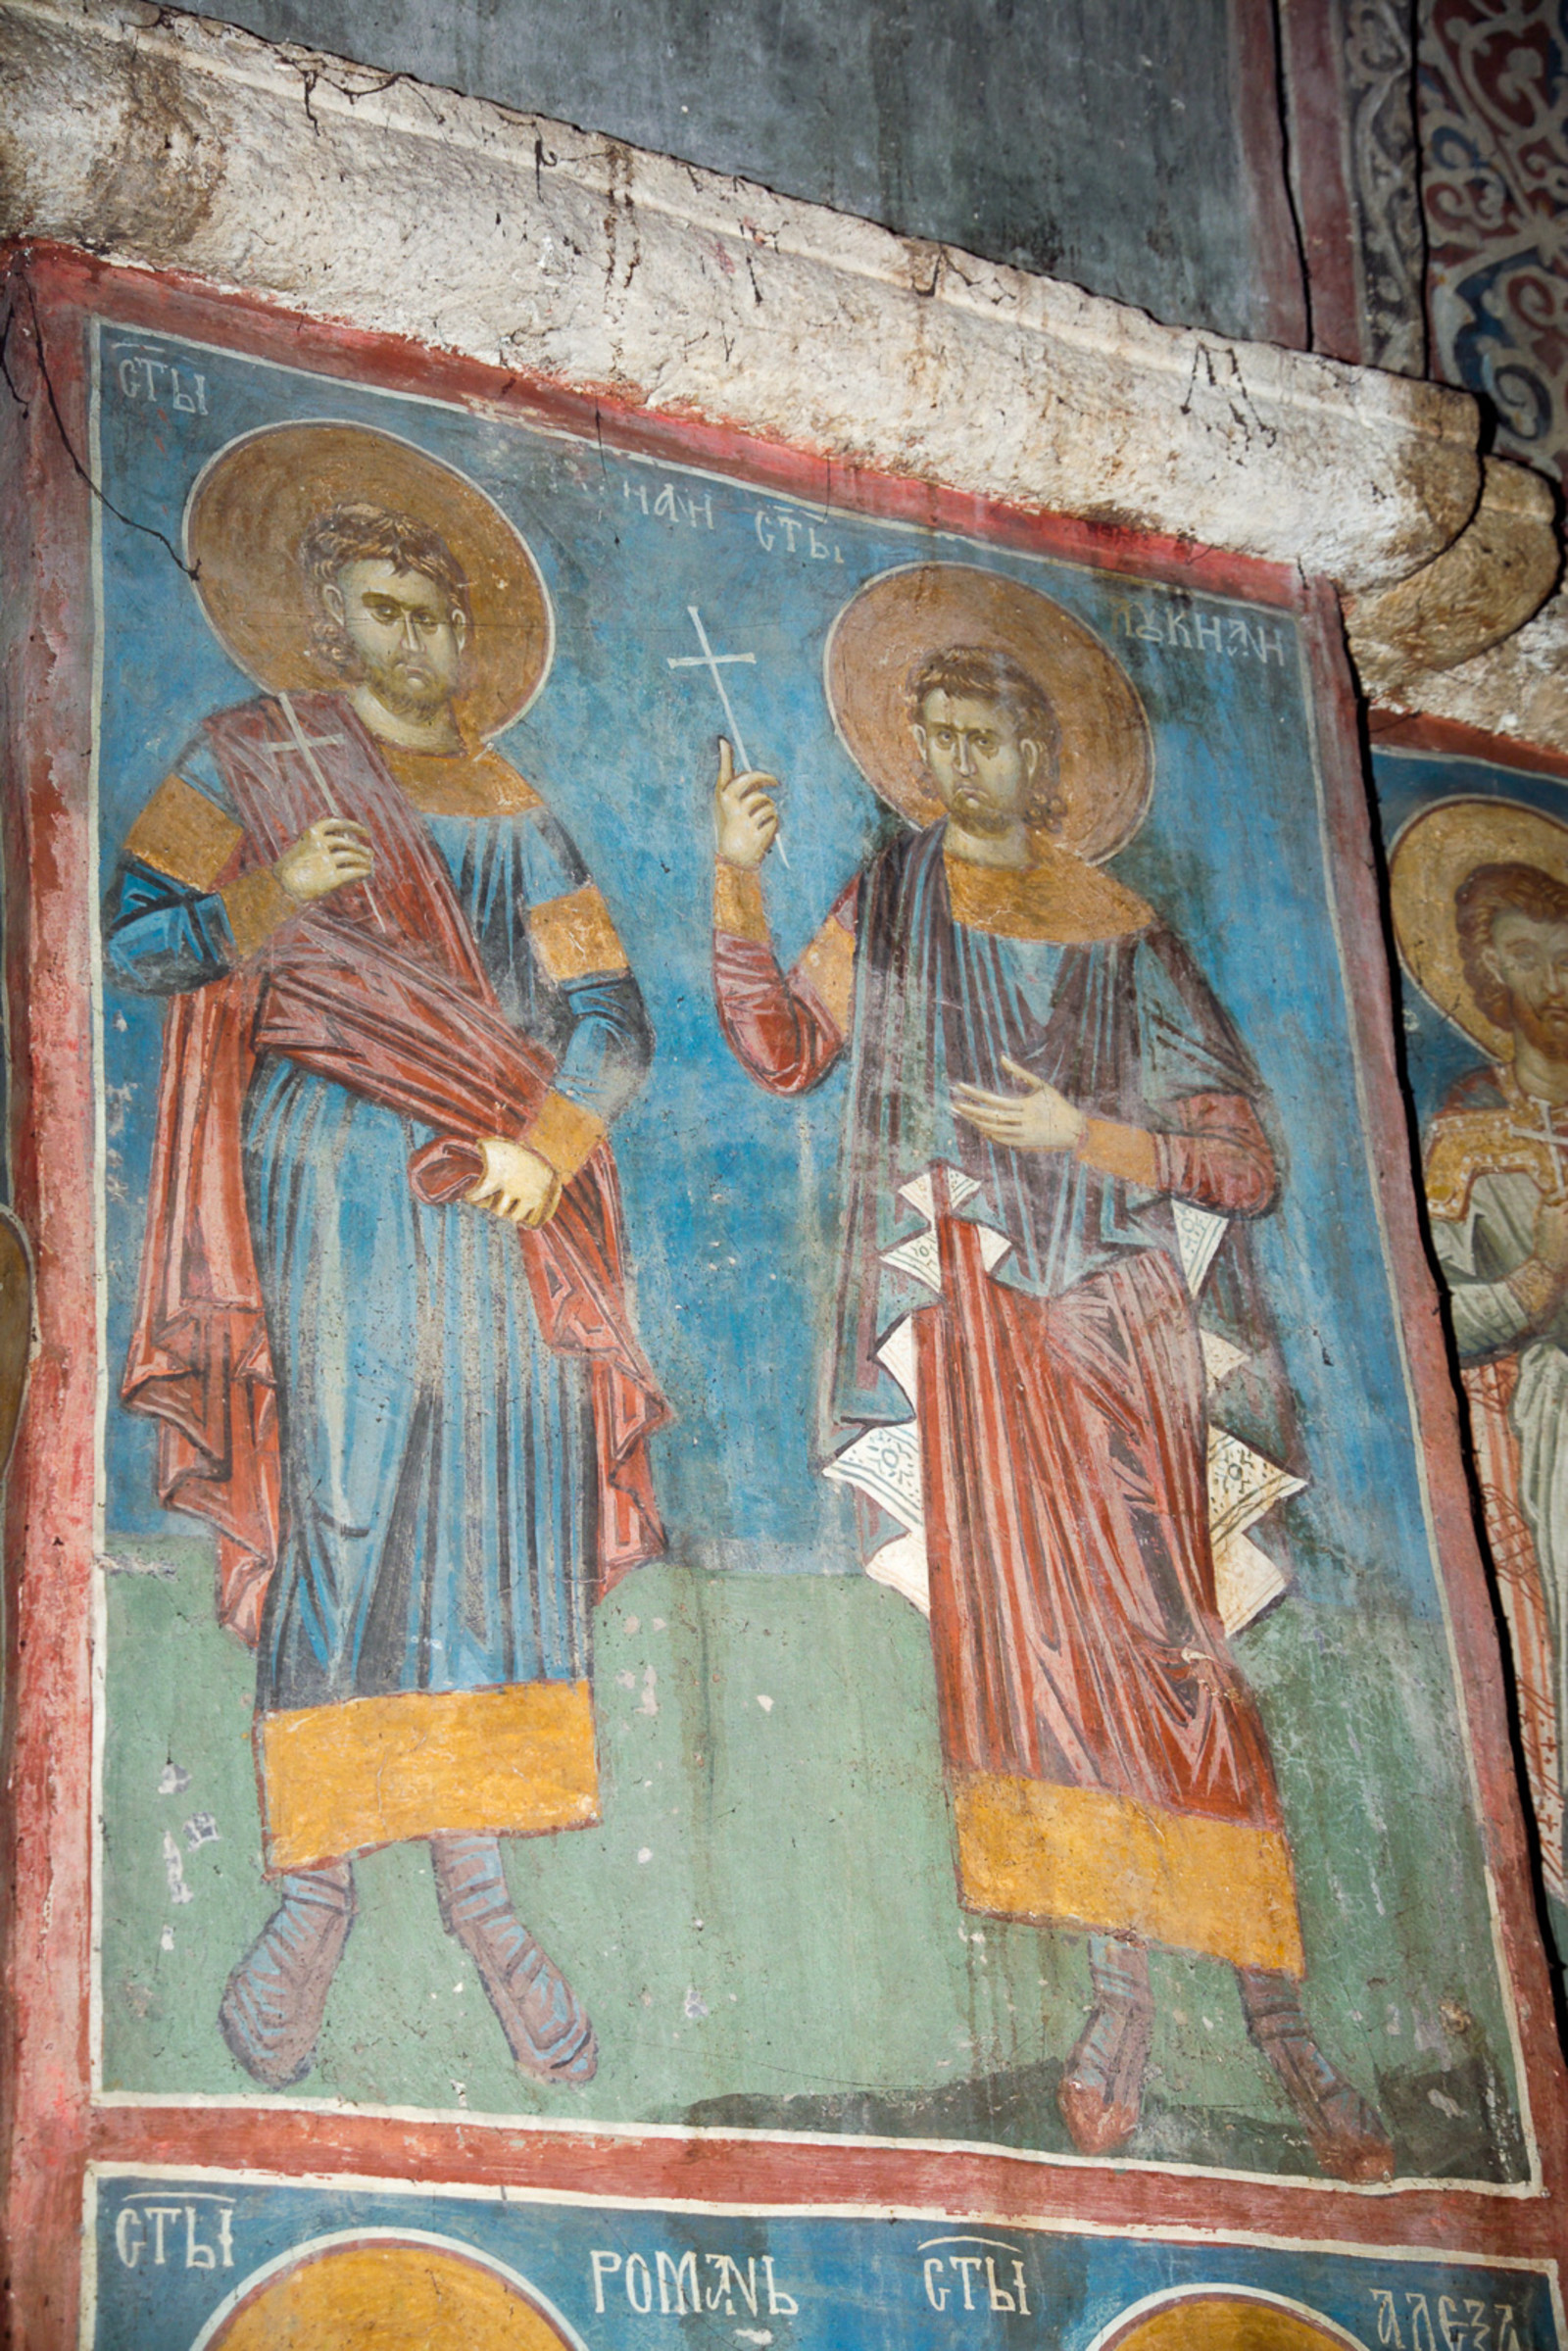 275,274 Unknown martyr, probably St. Hadrianus, and St. Lucianus